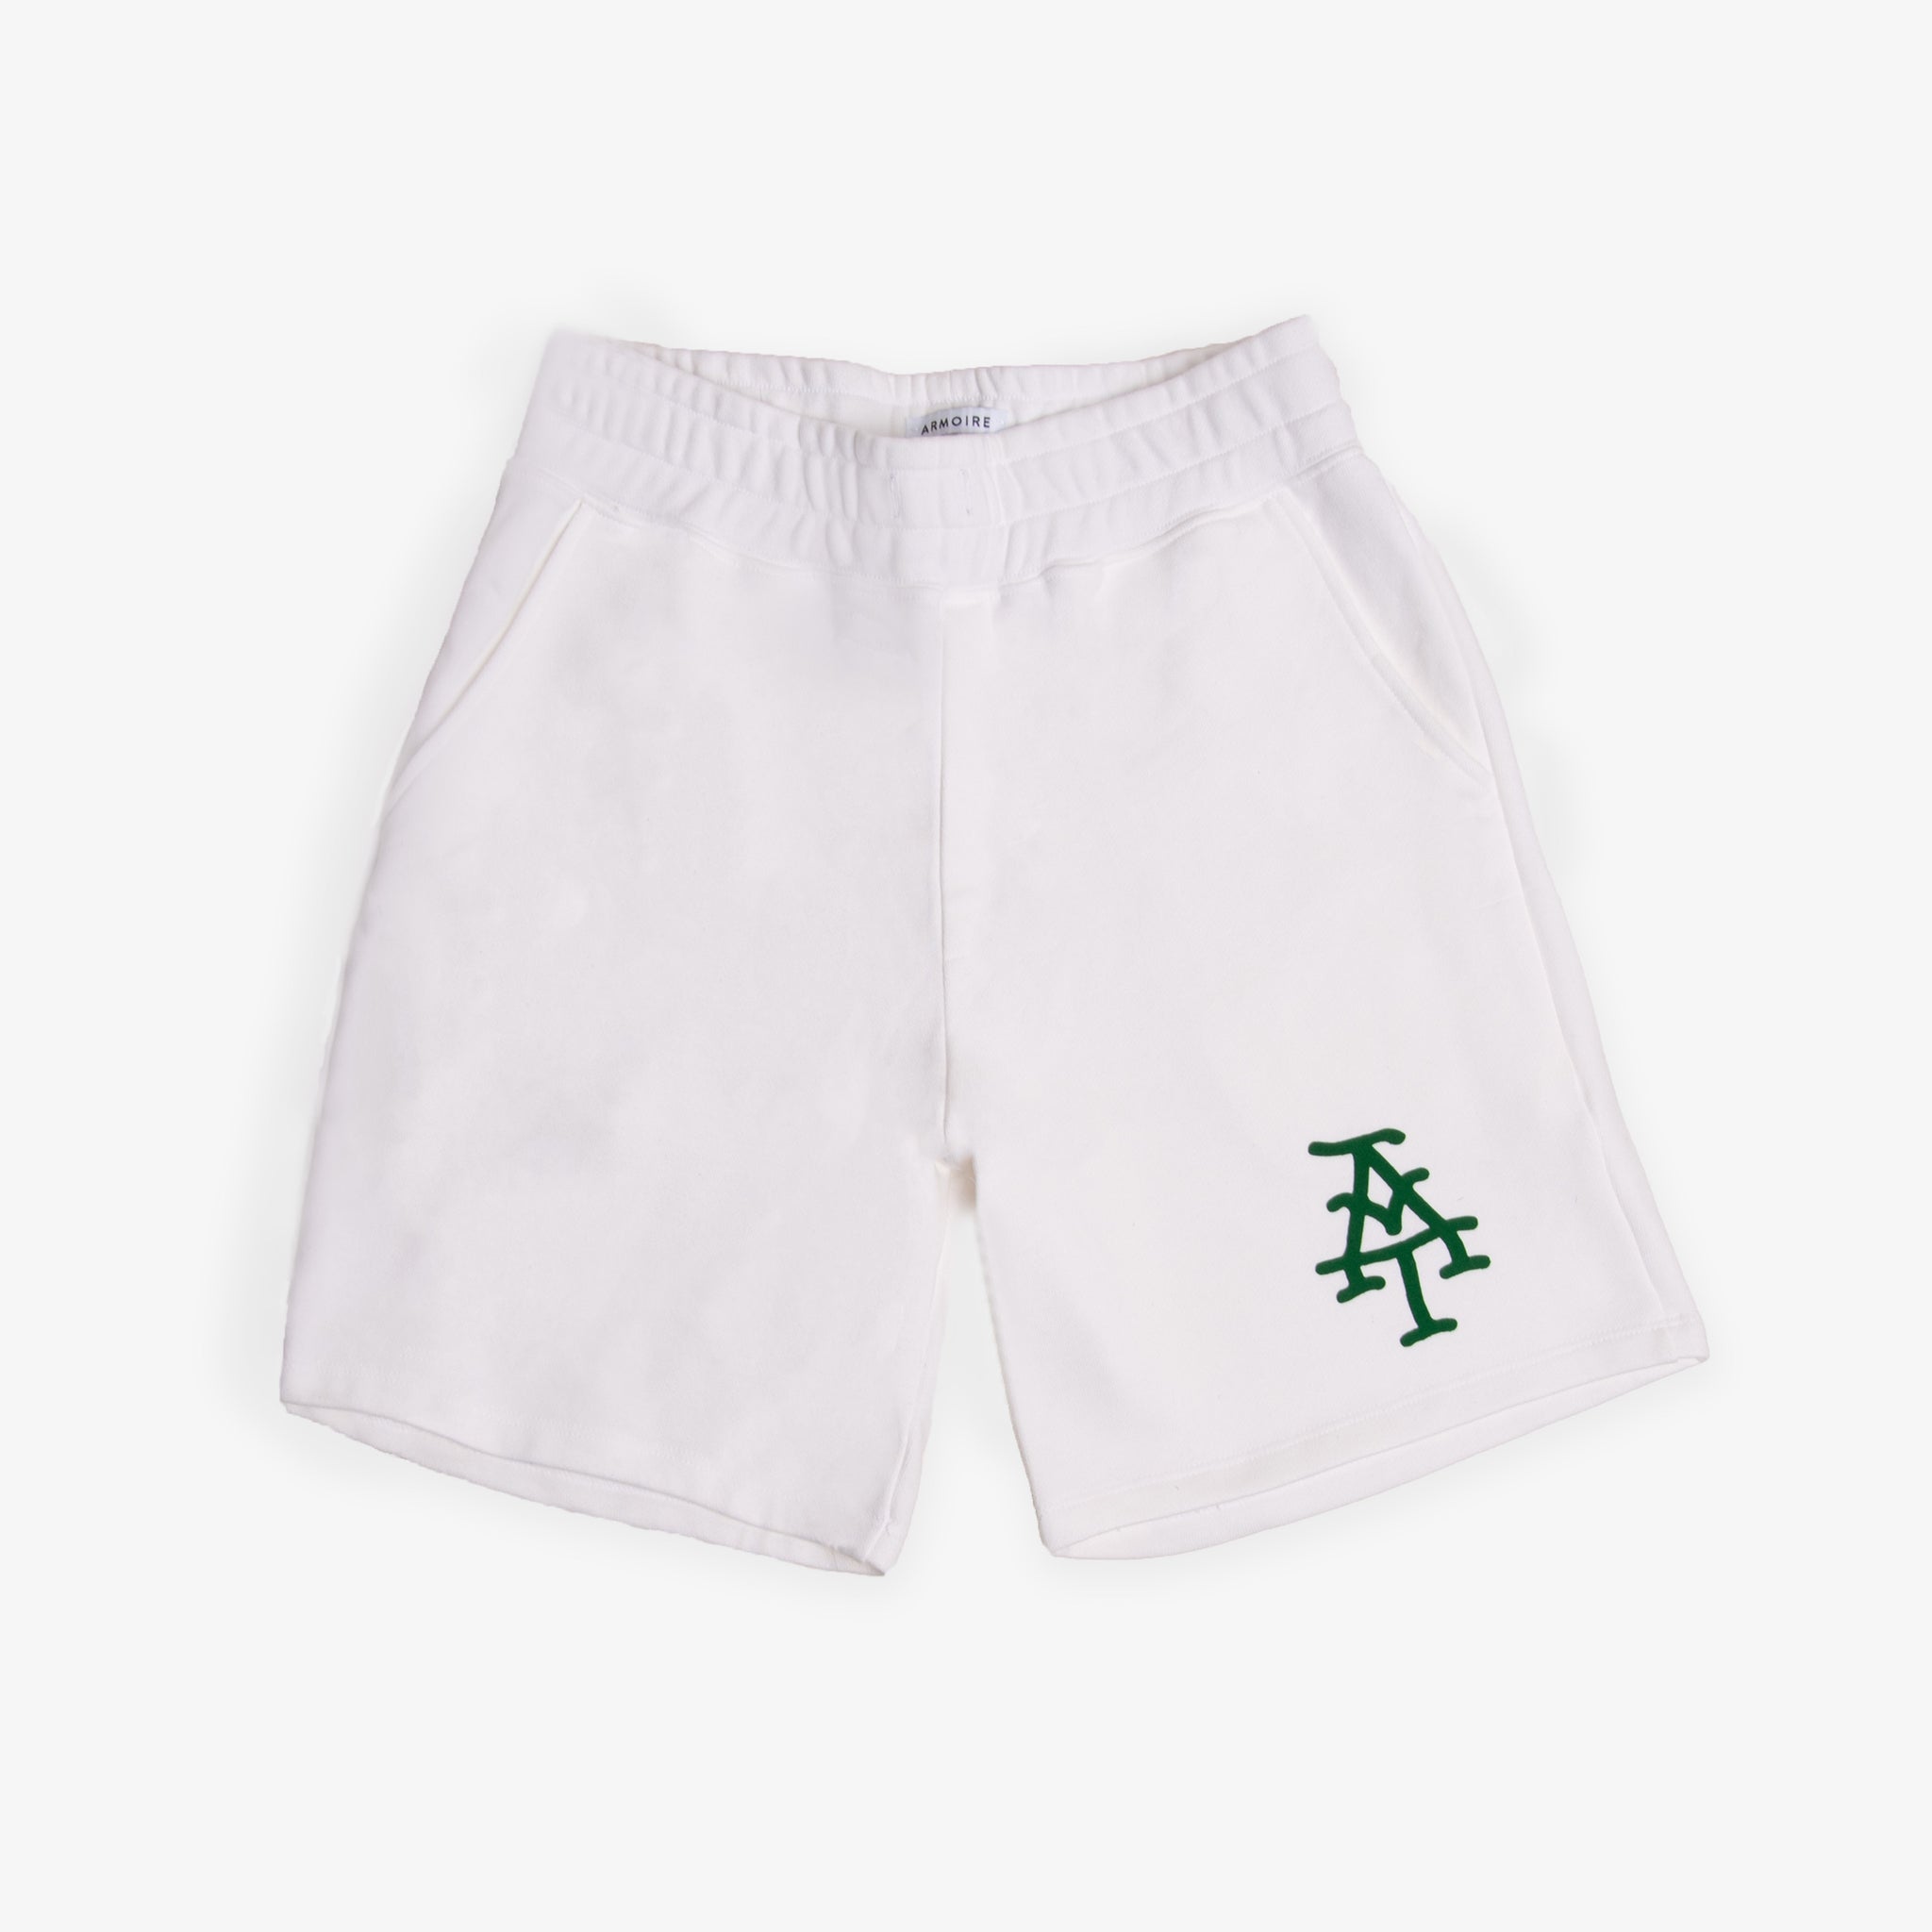 ARCHIVAL shorts by Armoire